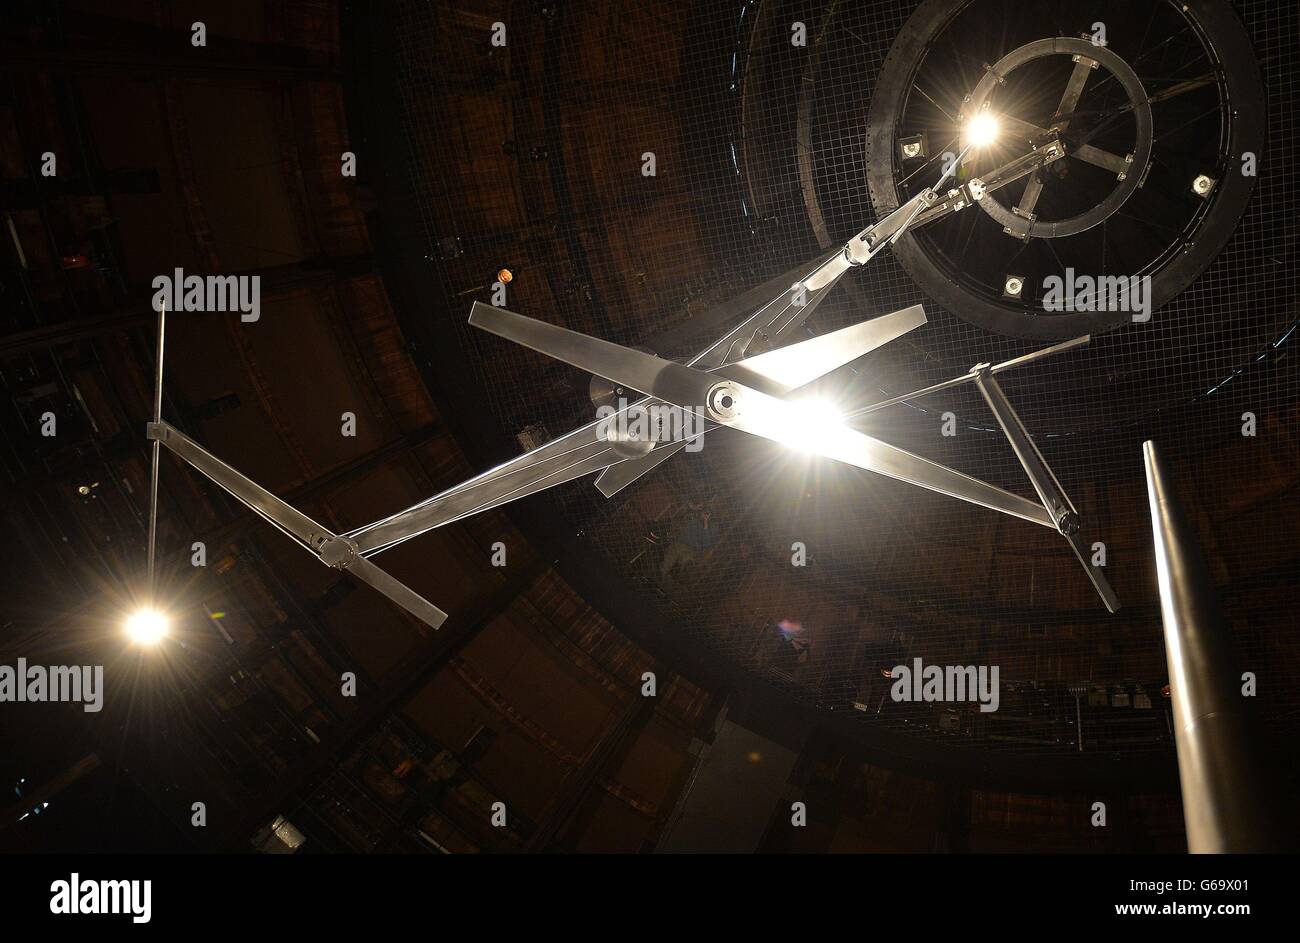 The work of British Artist Conrad Shawcross titled 'Timepiece', which is three revolving hands with lights at each end to replicate Clock hands, at a press preview at The Rounhouse , in north London, where the modern art will be on display for a month. Stock Photo